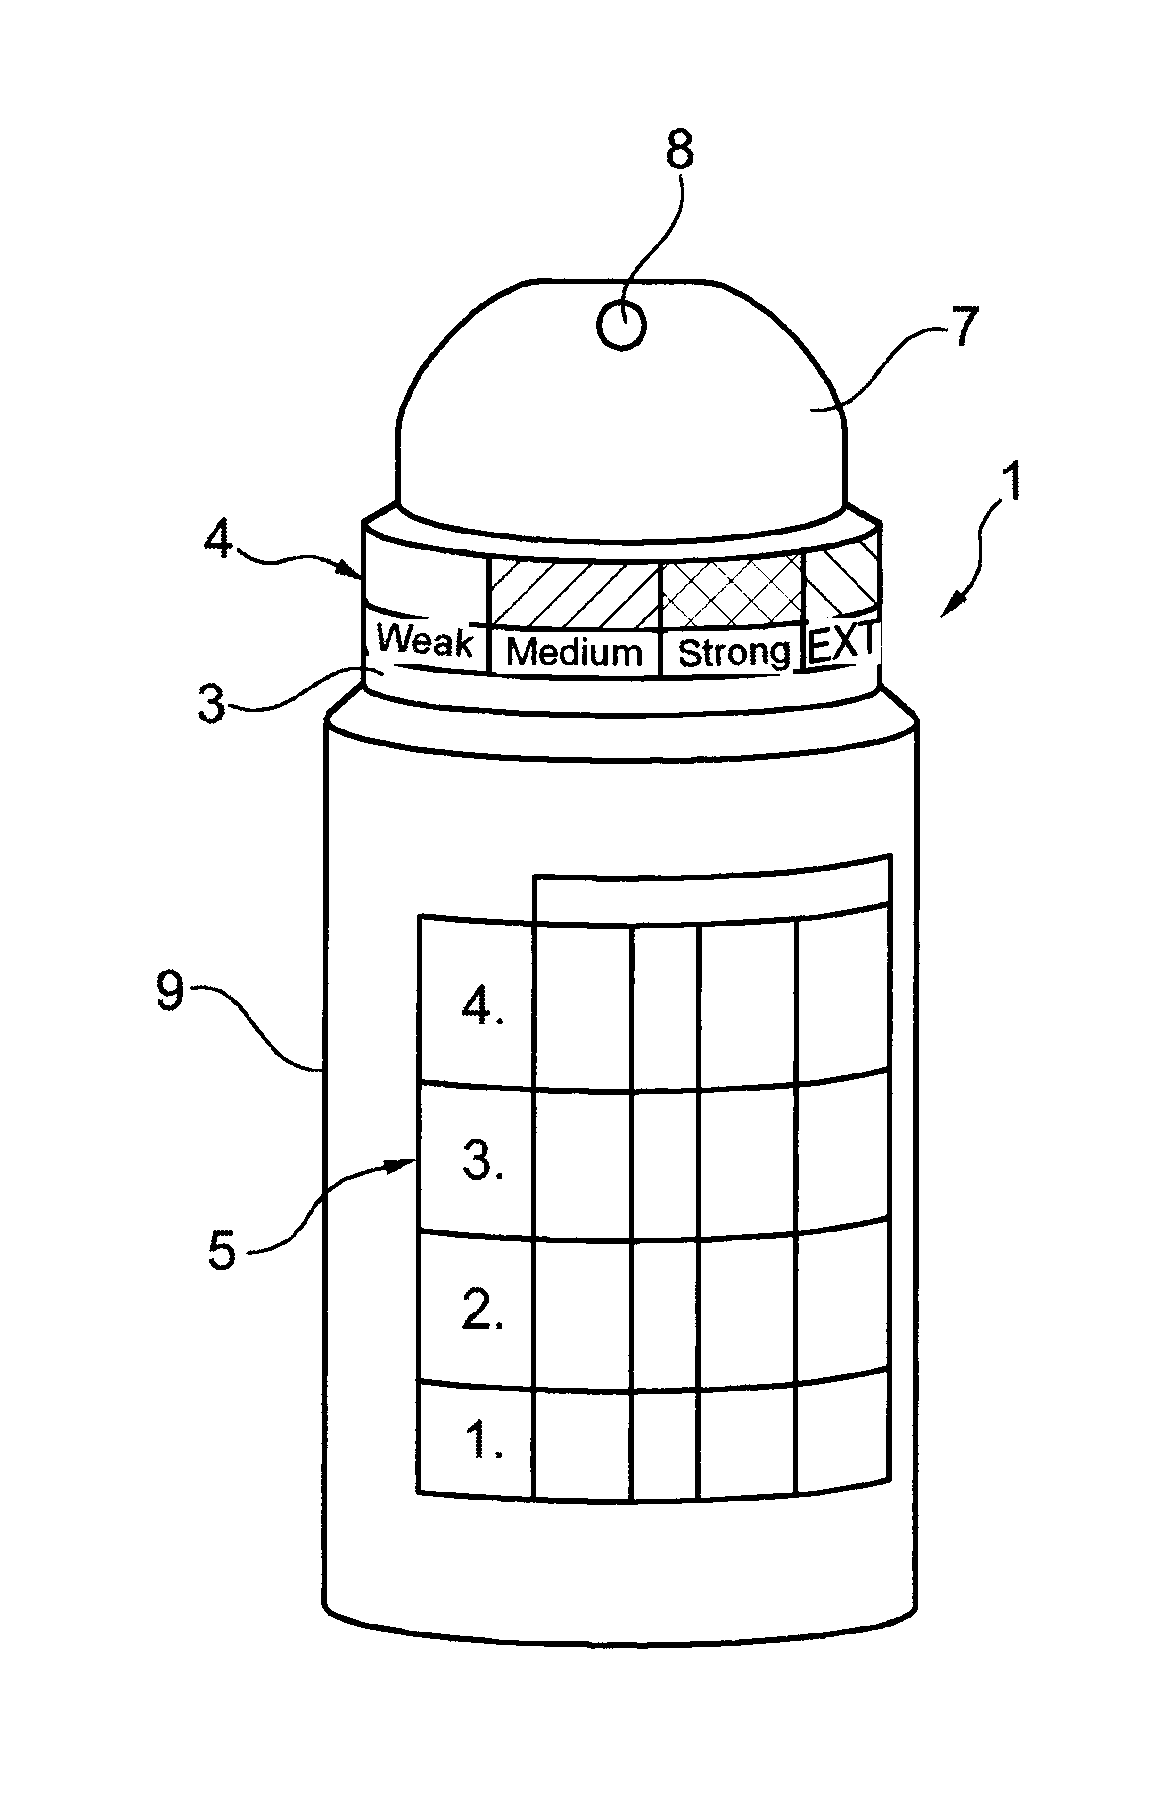 Device and method for determination of safe tanning time